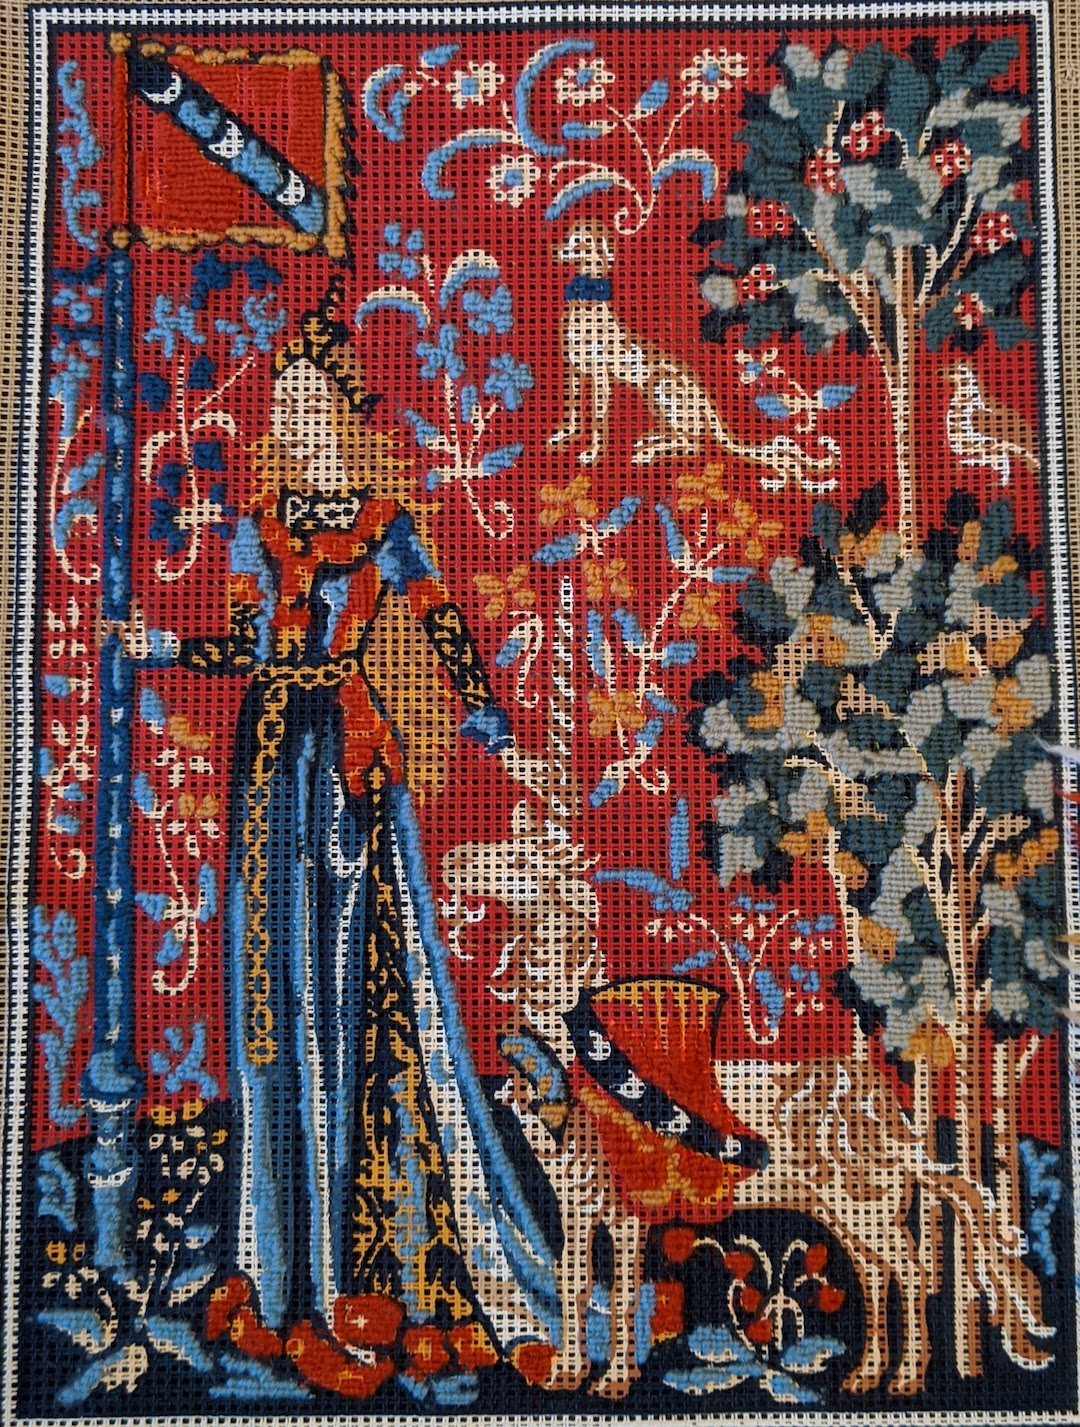 Lady with Unicorn My only desire Margot de Paris Tapestry/Needlepoint Kit 